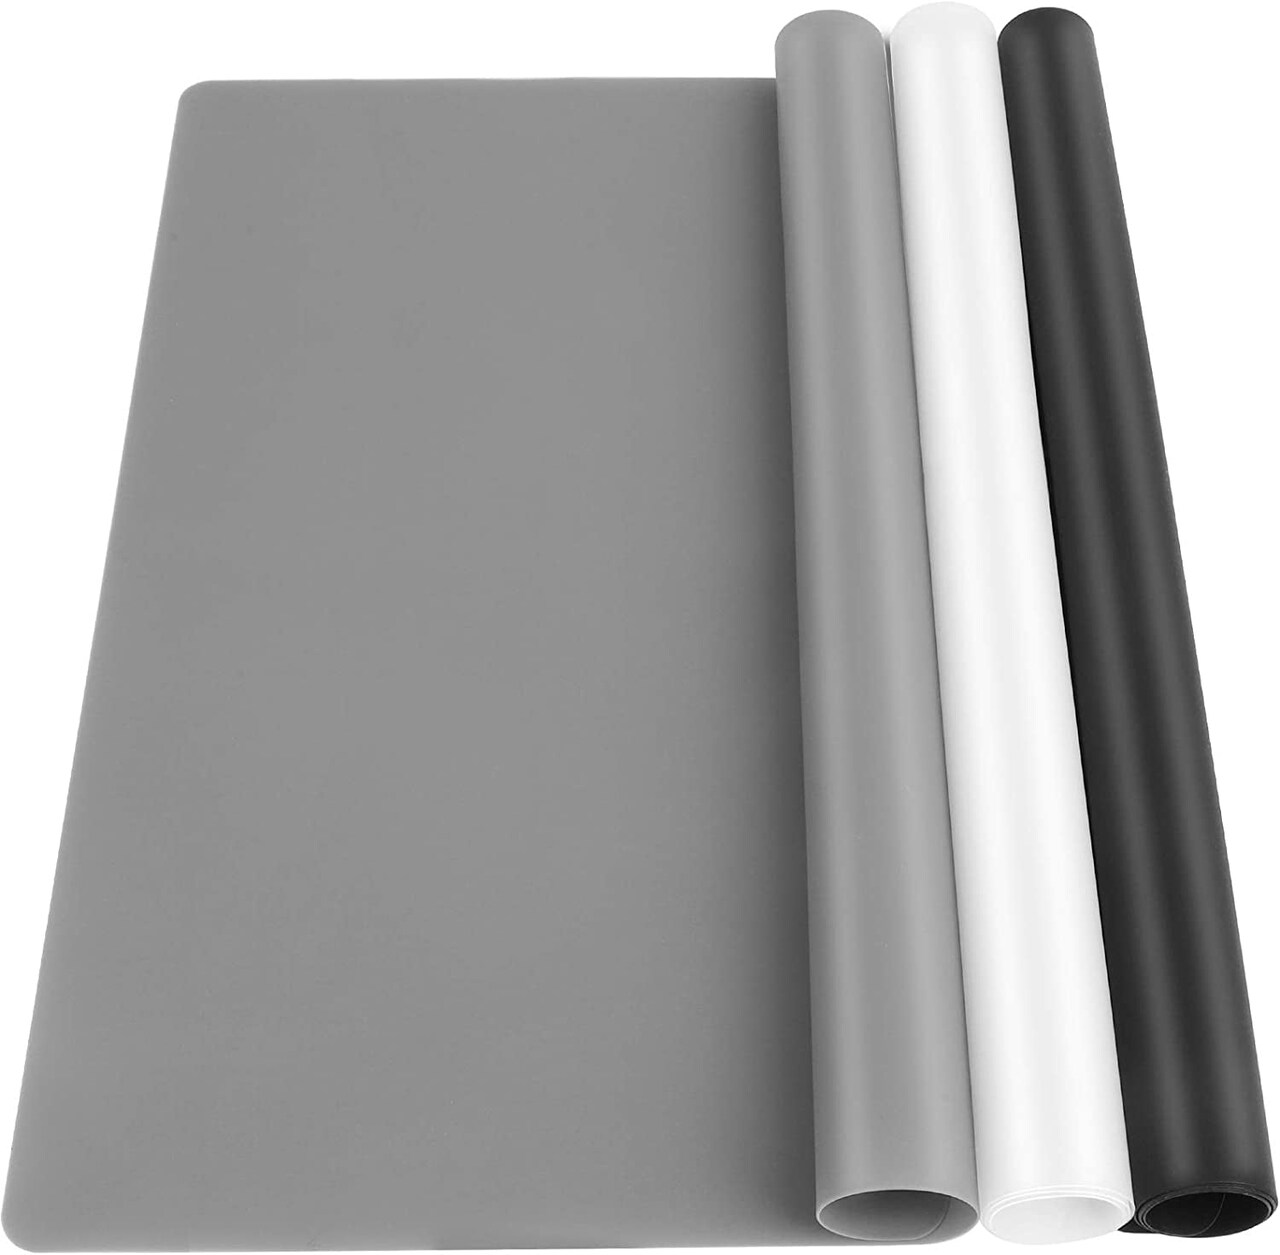 3 Pack A3 Large Silicone Mats for Crafts, 15.7”X 11.7”Silicone